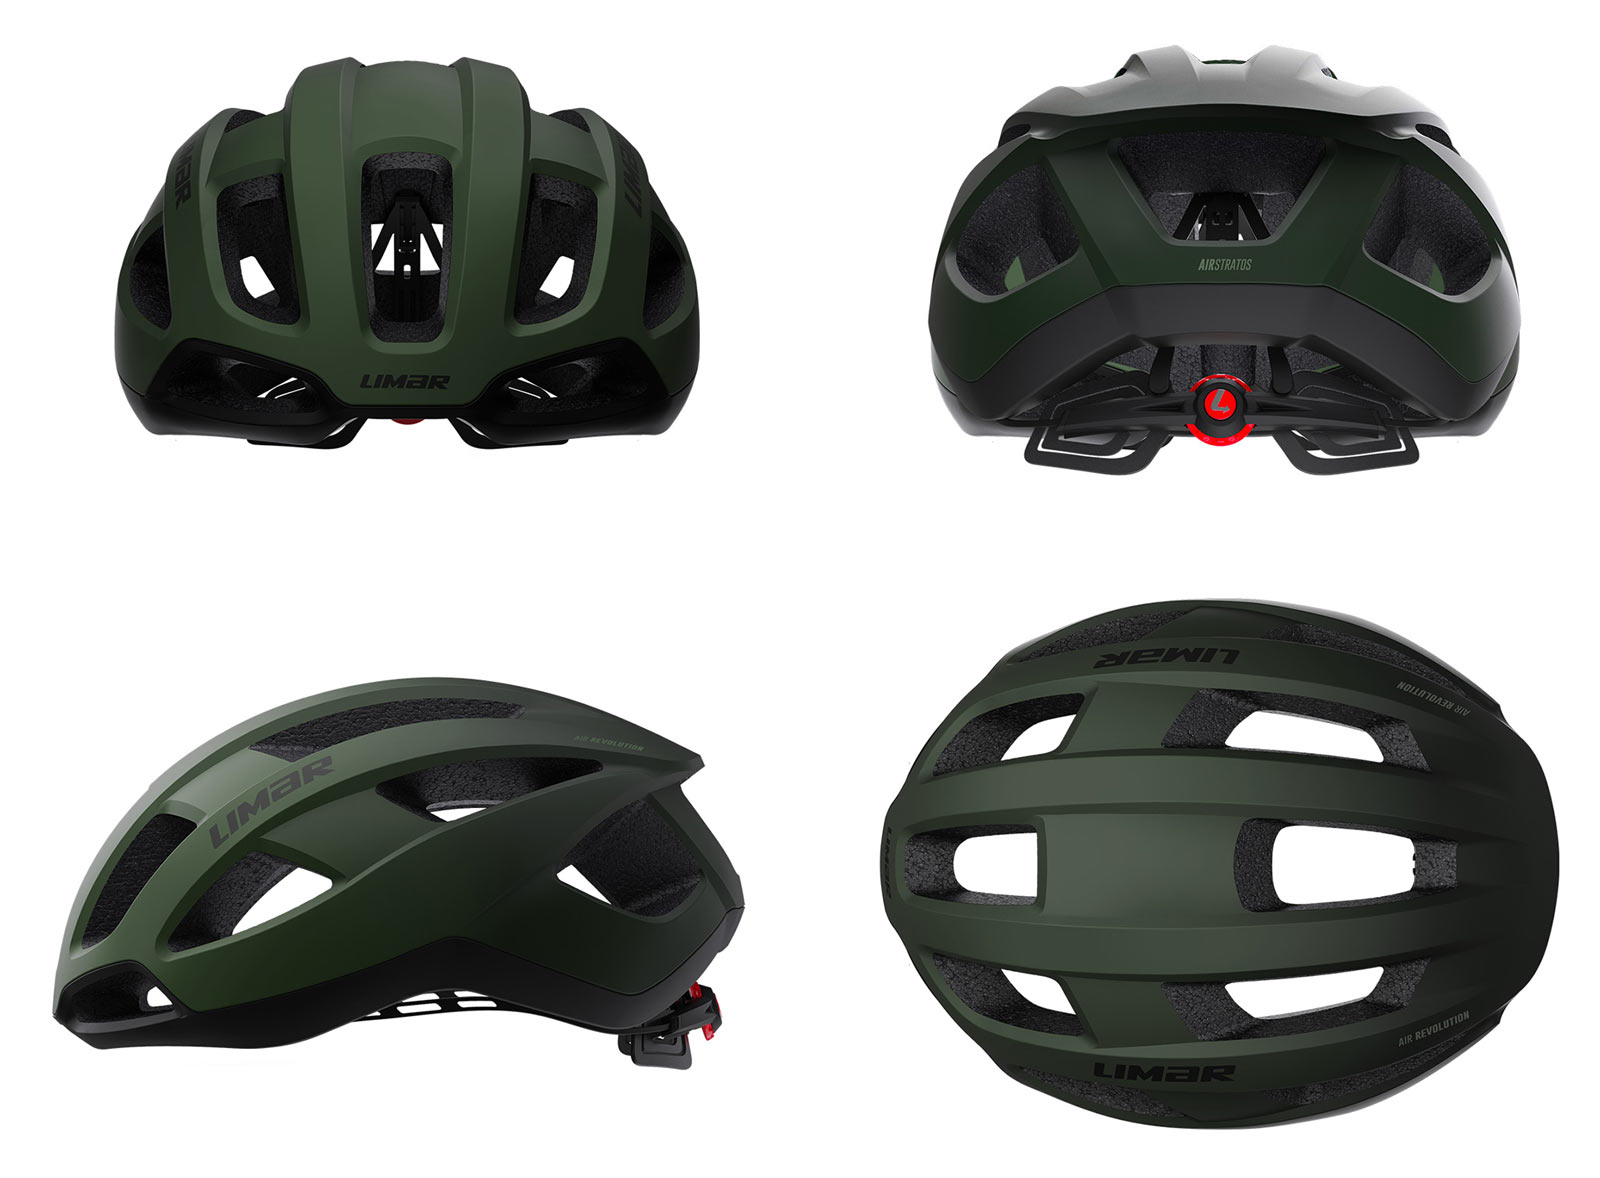 limar air stratos road and gravel bike helmet shown from all sides